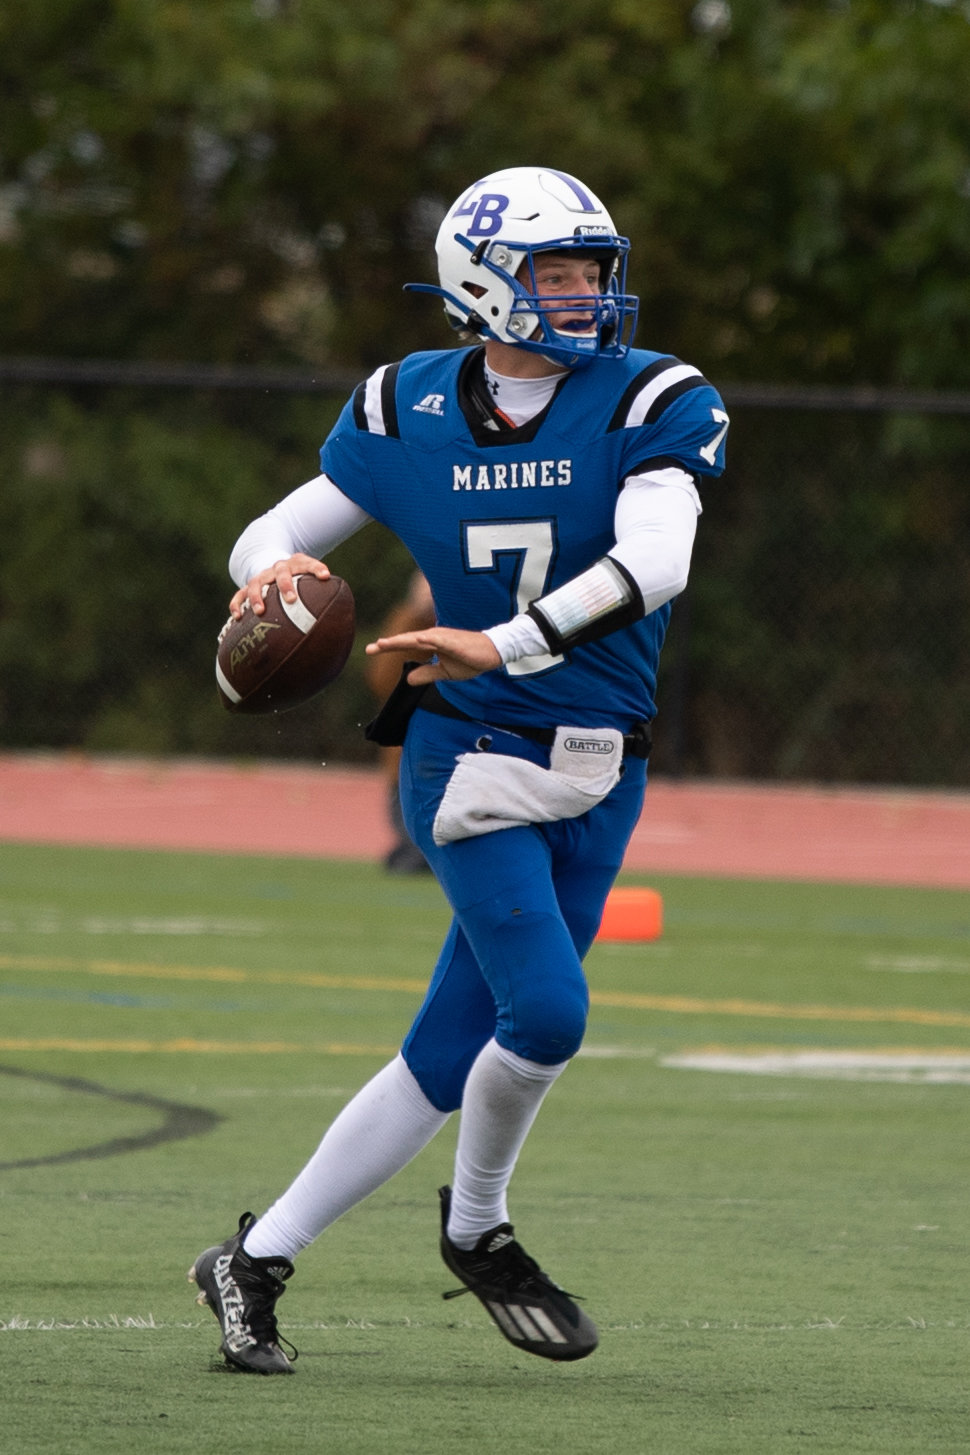 Senior quarterback Jeff Conway scored the game-winning touchdown in overtime as the Marines rallied to beat South Side, 28-27.